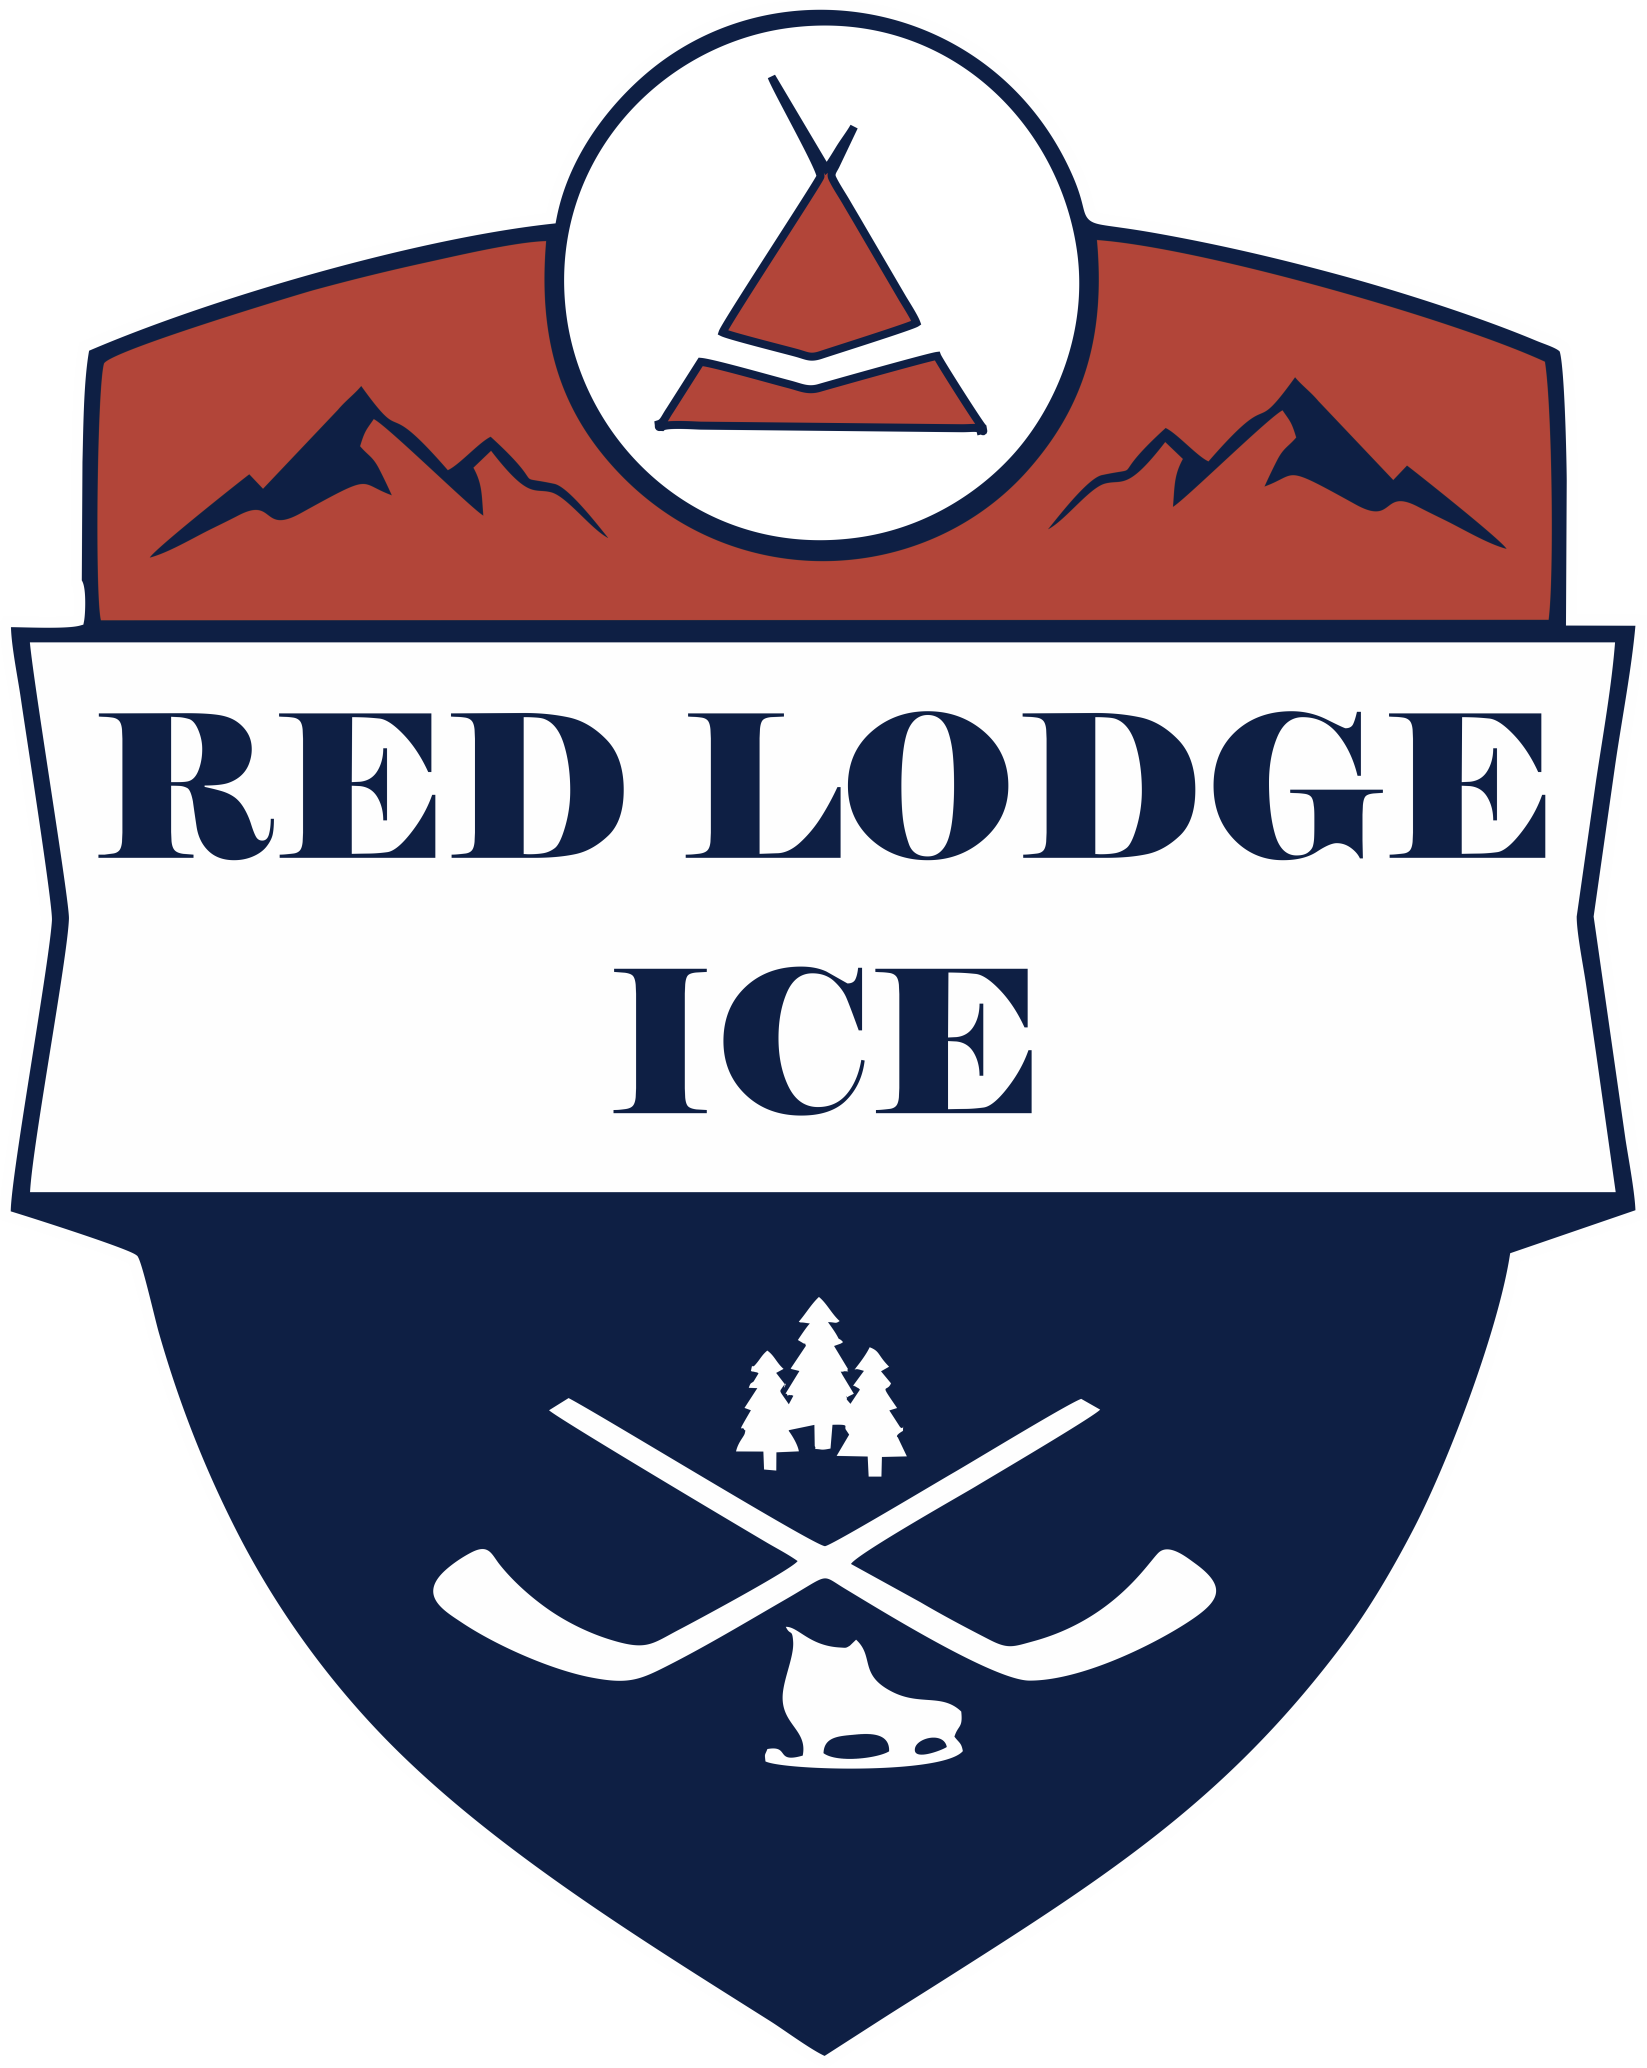 Red lodge ice